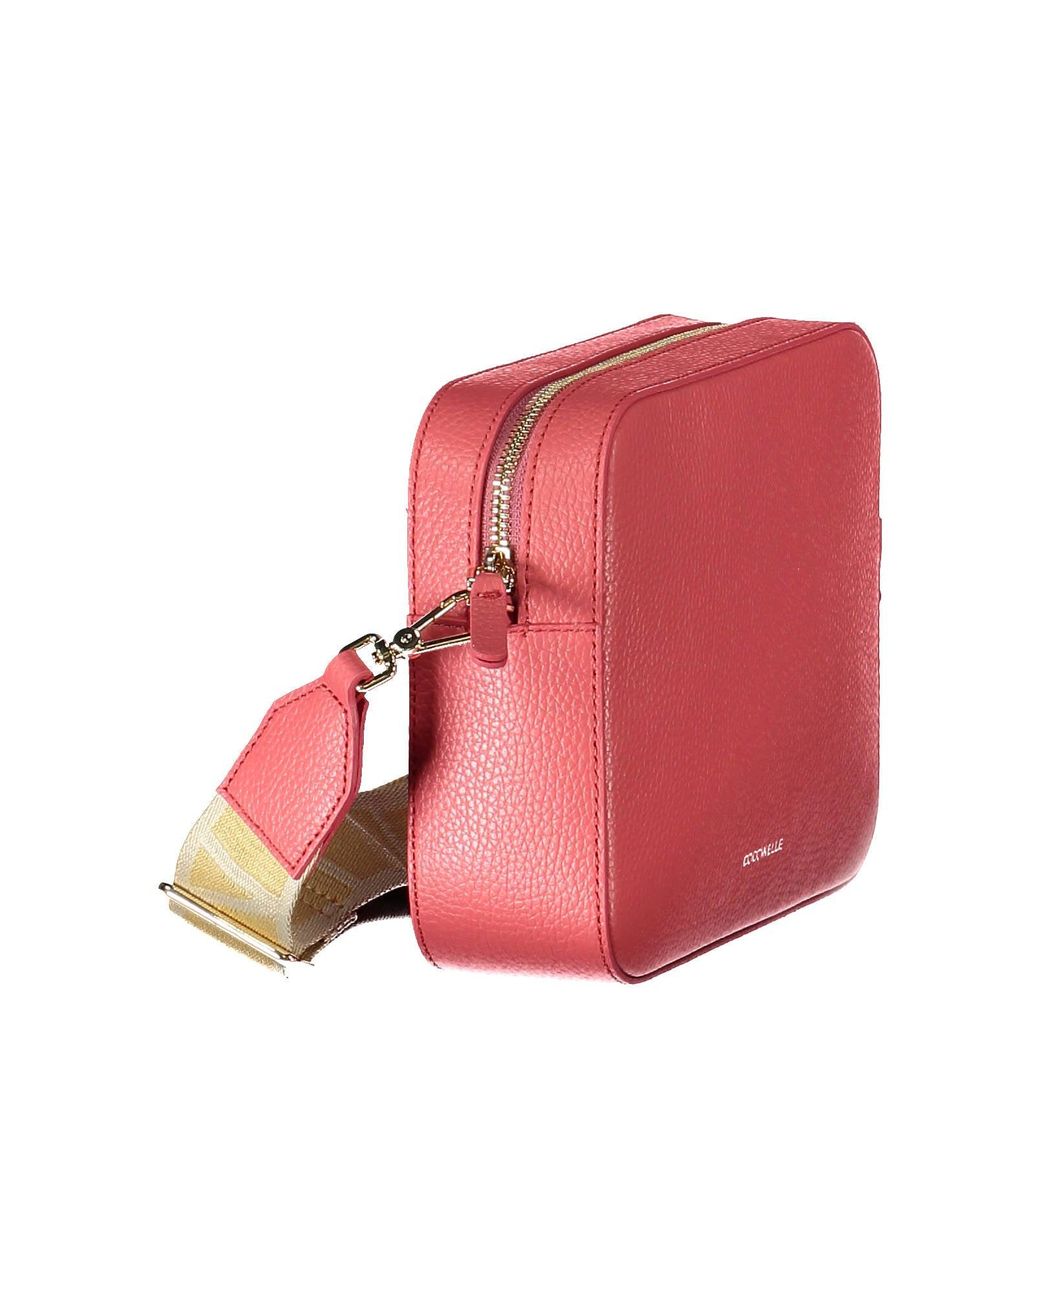 Coccinelle Leather Handbag in Pink | Lyst